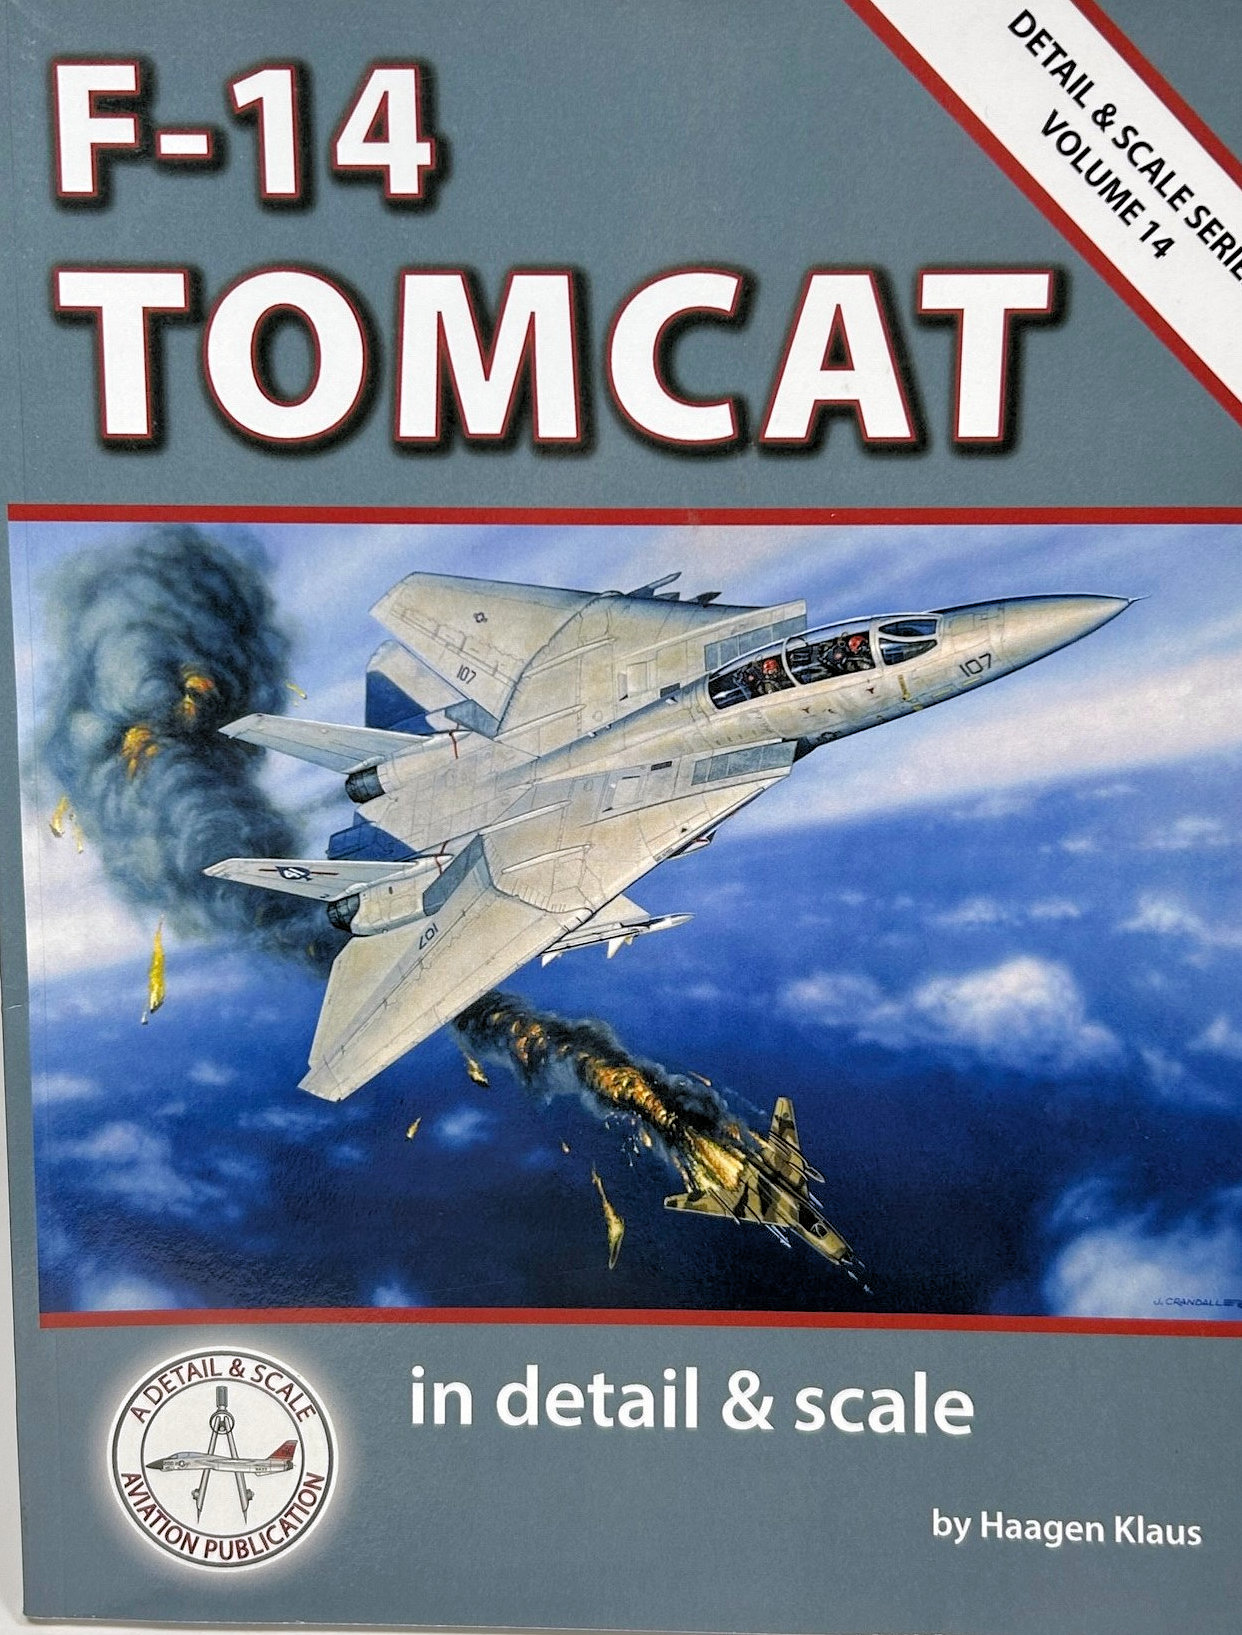 https://reviews.ipmsusa.org/sites/default/files/reviews/f-14-tomcat-detail-scale/1-front-cover.jpg